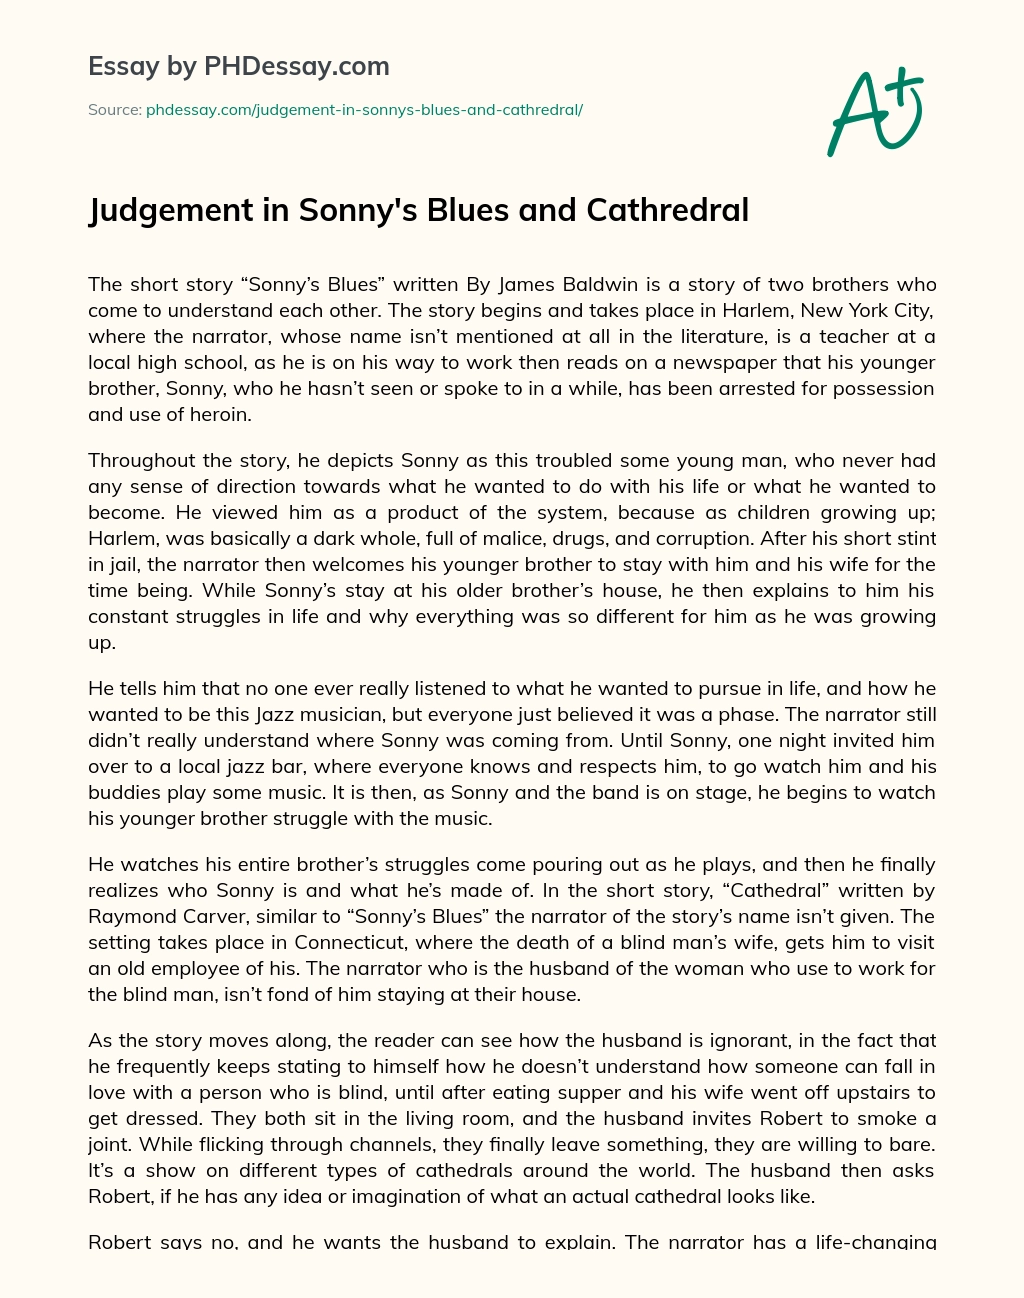 Judgement in Sonny’s Blues and Cathredral essay